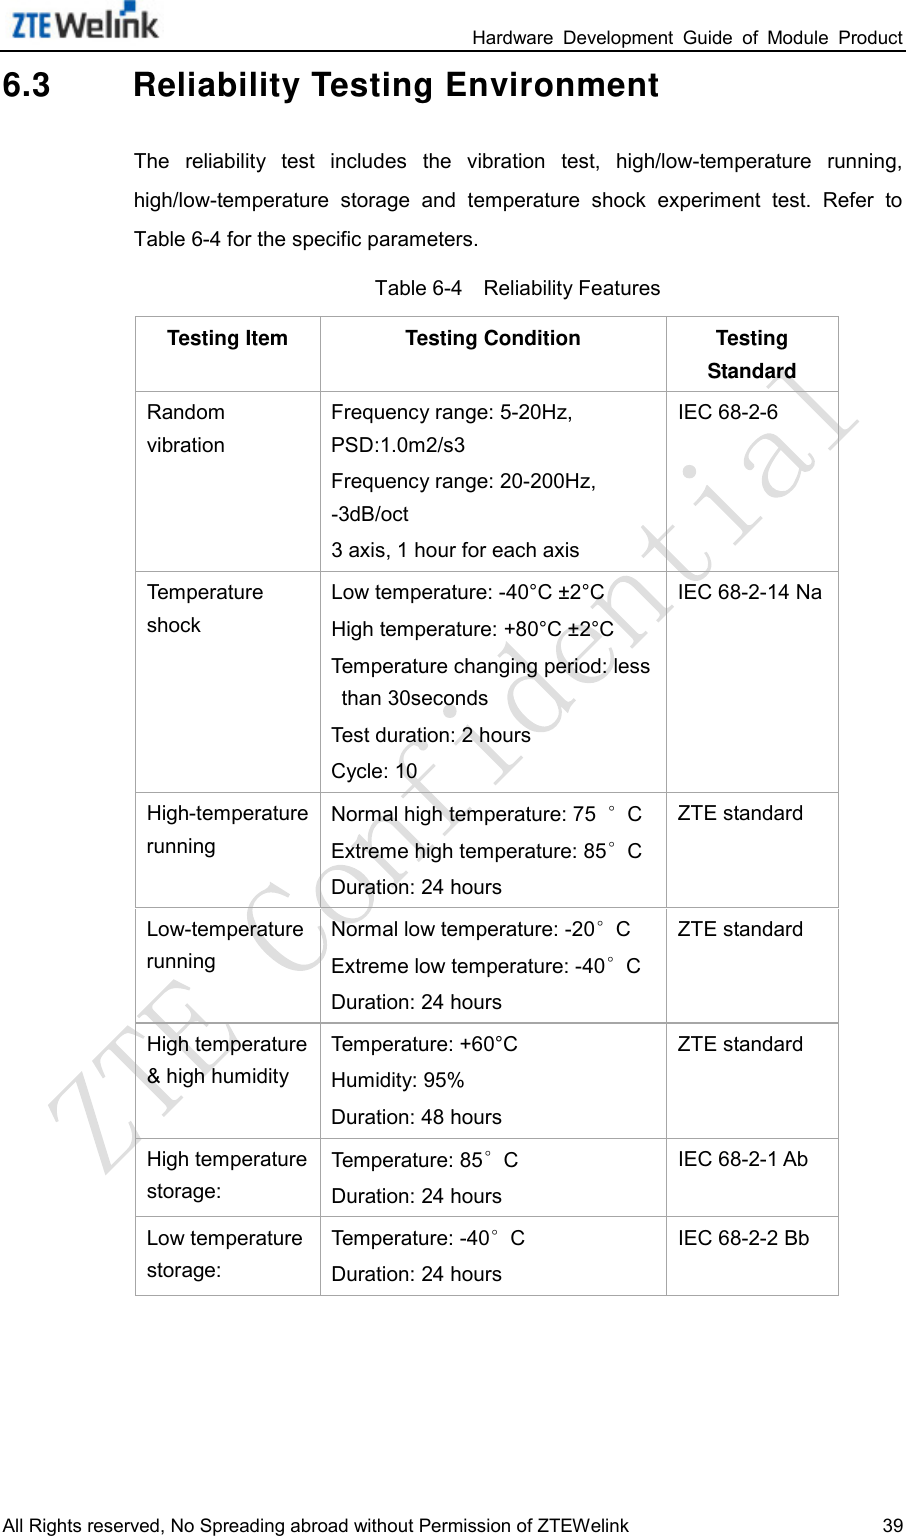                                                                 Hardware  Development  Guide  of  Module  Product All Rights reserved, No Spreading abroad without Permission of ZTEWelink 39 6.3 Reliability Testing Environment The reliability  test  includes the  vibration test,  high/low-temperature  running, high/low-temperature  storage  and temperature  shock  experiment  test.  Refer  to Table 6-4 for the specific parameters.   Table 6-4    Reliability Features Testing Item Testing Condition Testing Standard Random vibration Frequency range: 5-20Hz, PSD:1.0m2/s3 Frequency range: 20-200Hz, -3dB/oct 3 axis, 1 hour for each axis IEC 68-2-6 Temperature shock Low temperature: -40°C ±2°C   High temperature: +80°C ±2°C   Temperature changing period: less than 30seconds   Test duration: 2 hours Cycle: 10 IEC 68-2-14 Na High-temperature running Normal high temperature: 75  °C Extreme high temperature: 85°C Duration: 24 hours ZTE standard Low-temperature running Normal low temperature: -20°C Extreme low temperature: -40°C Duration: 24 hours ZTE standard High temperature &amp; high humidity Temperature: +60°C Humidity: 95% Duration: 48 hours ZTE standard High temperature storage:   Temperature: 85°C Duration: 24 hours IEC 68-2-1 Ab Low temperature storage:   Temperature: -40°C Duration: 24 hours IEC 68-2-2 Bb 